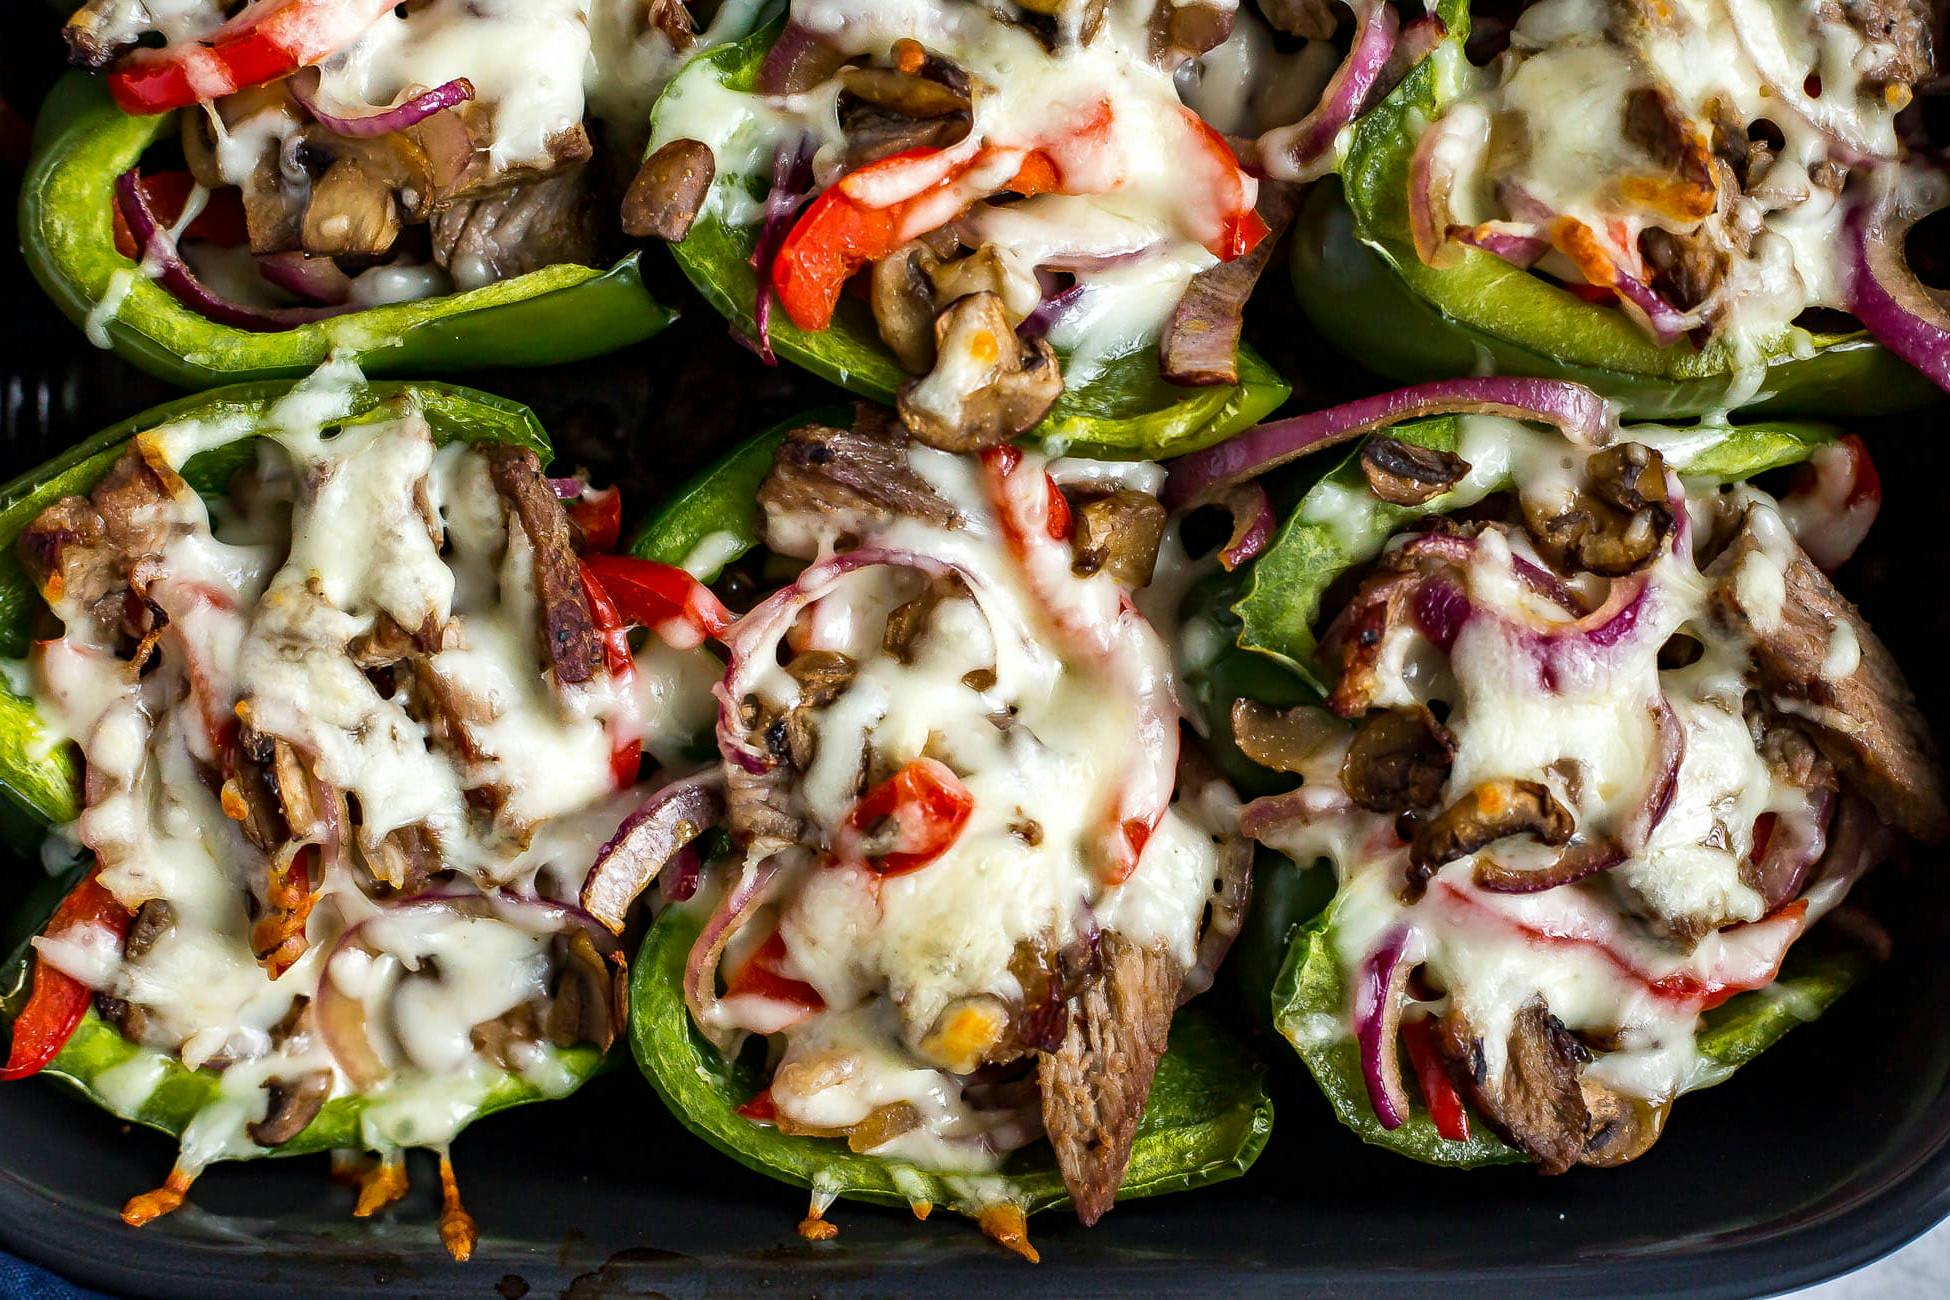 Green bell peppers stuffed with meat, veggies and cheese